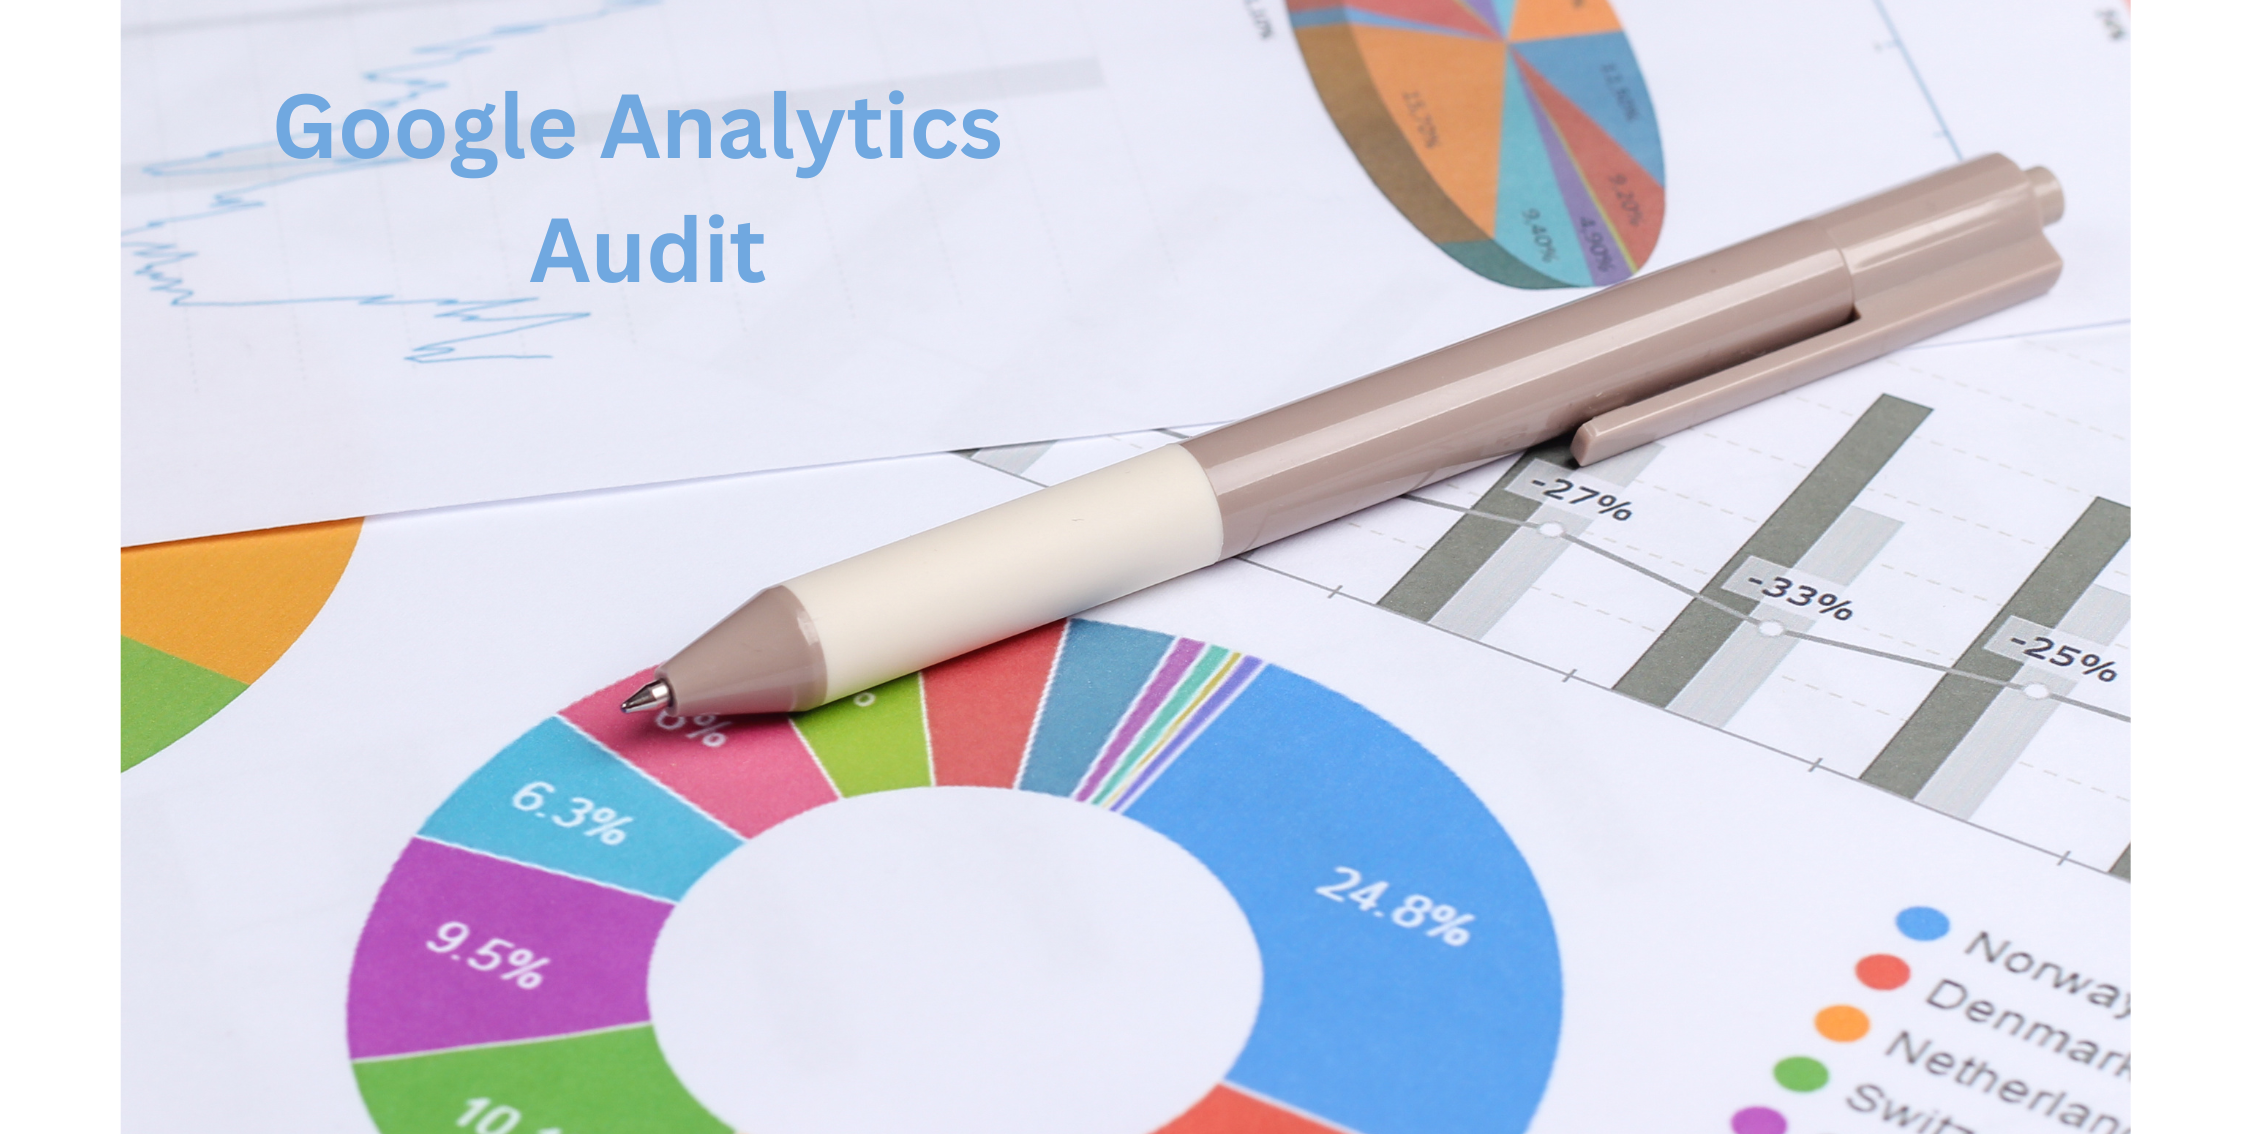 Audit Your Google Analytics 4 Implementation - A Step By Step Guide